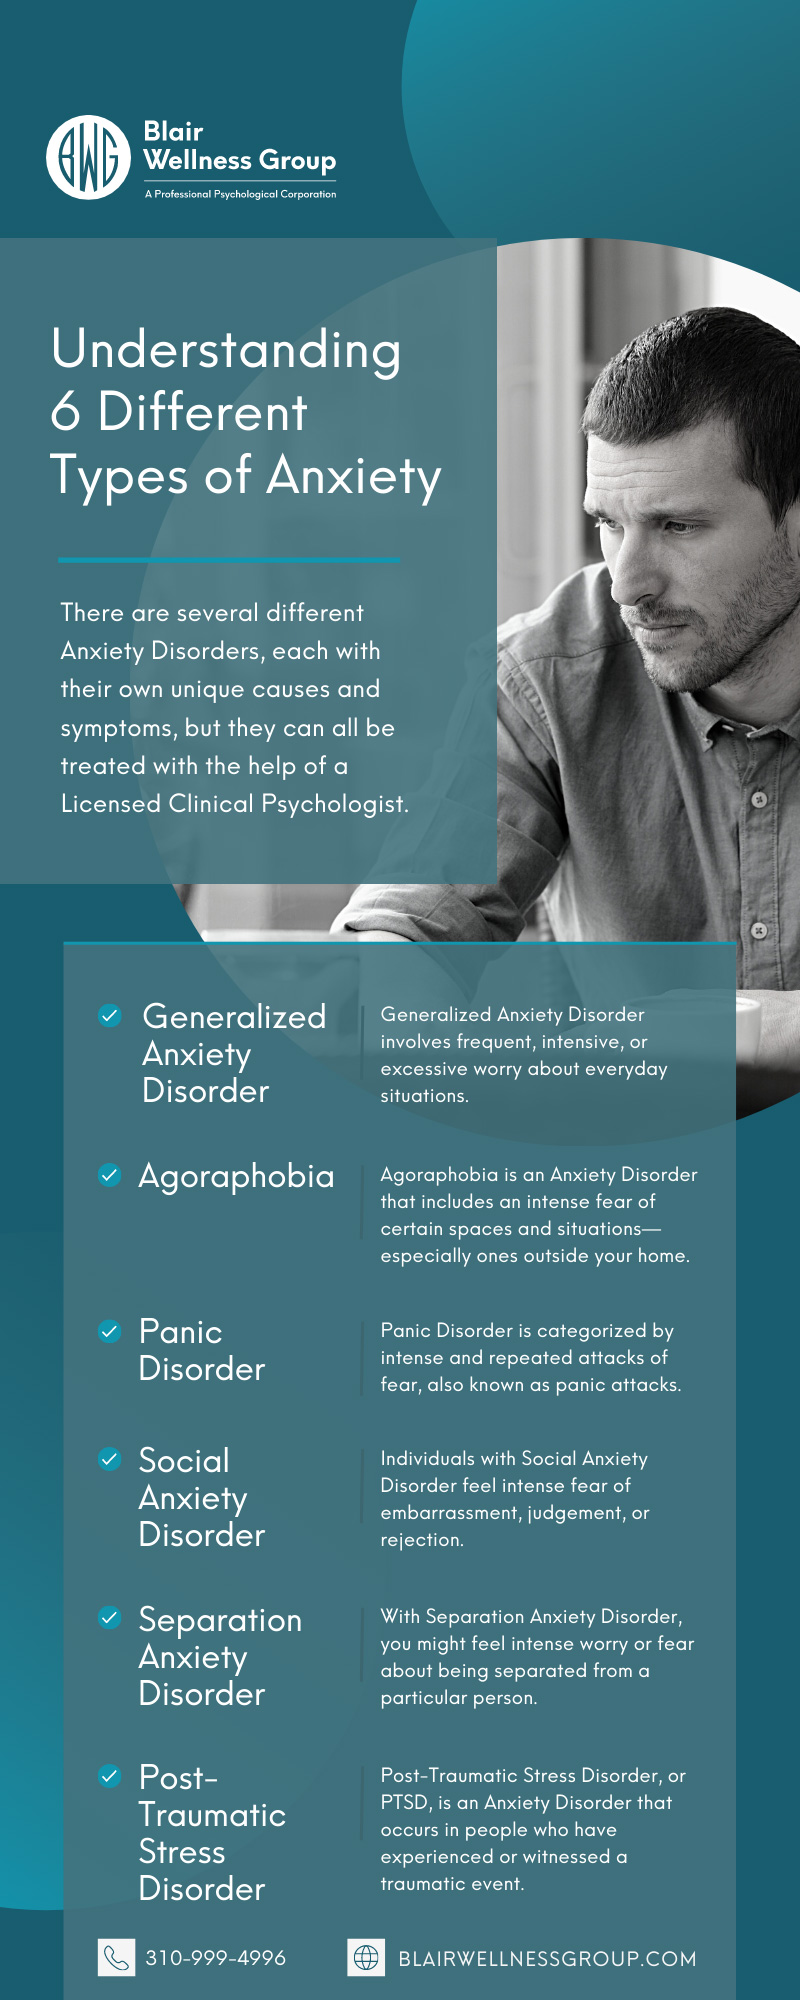 Understanding 6 Different Types of Anxiety